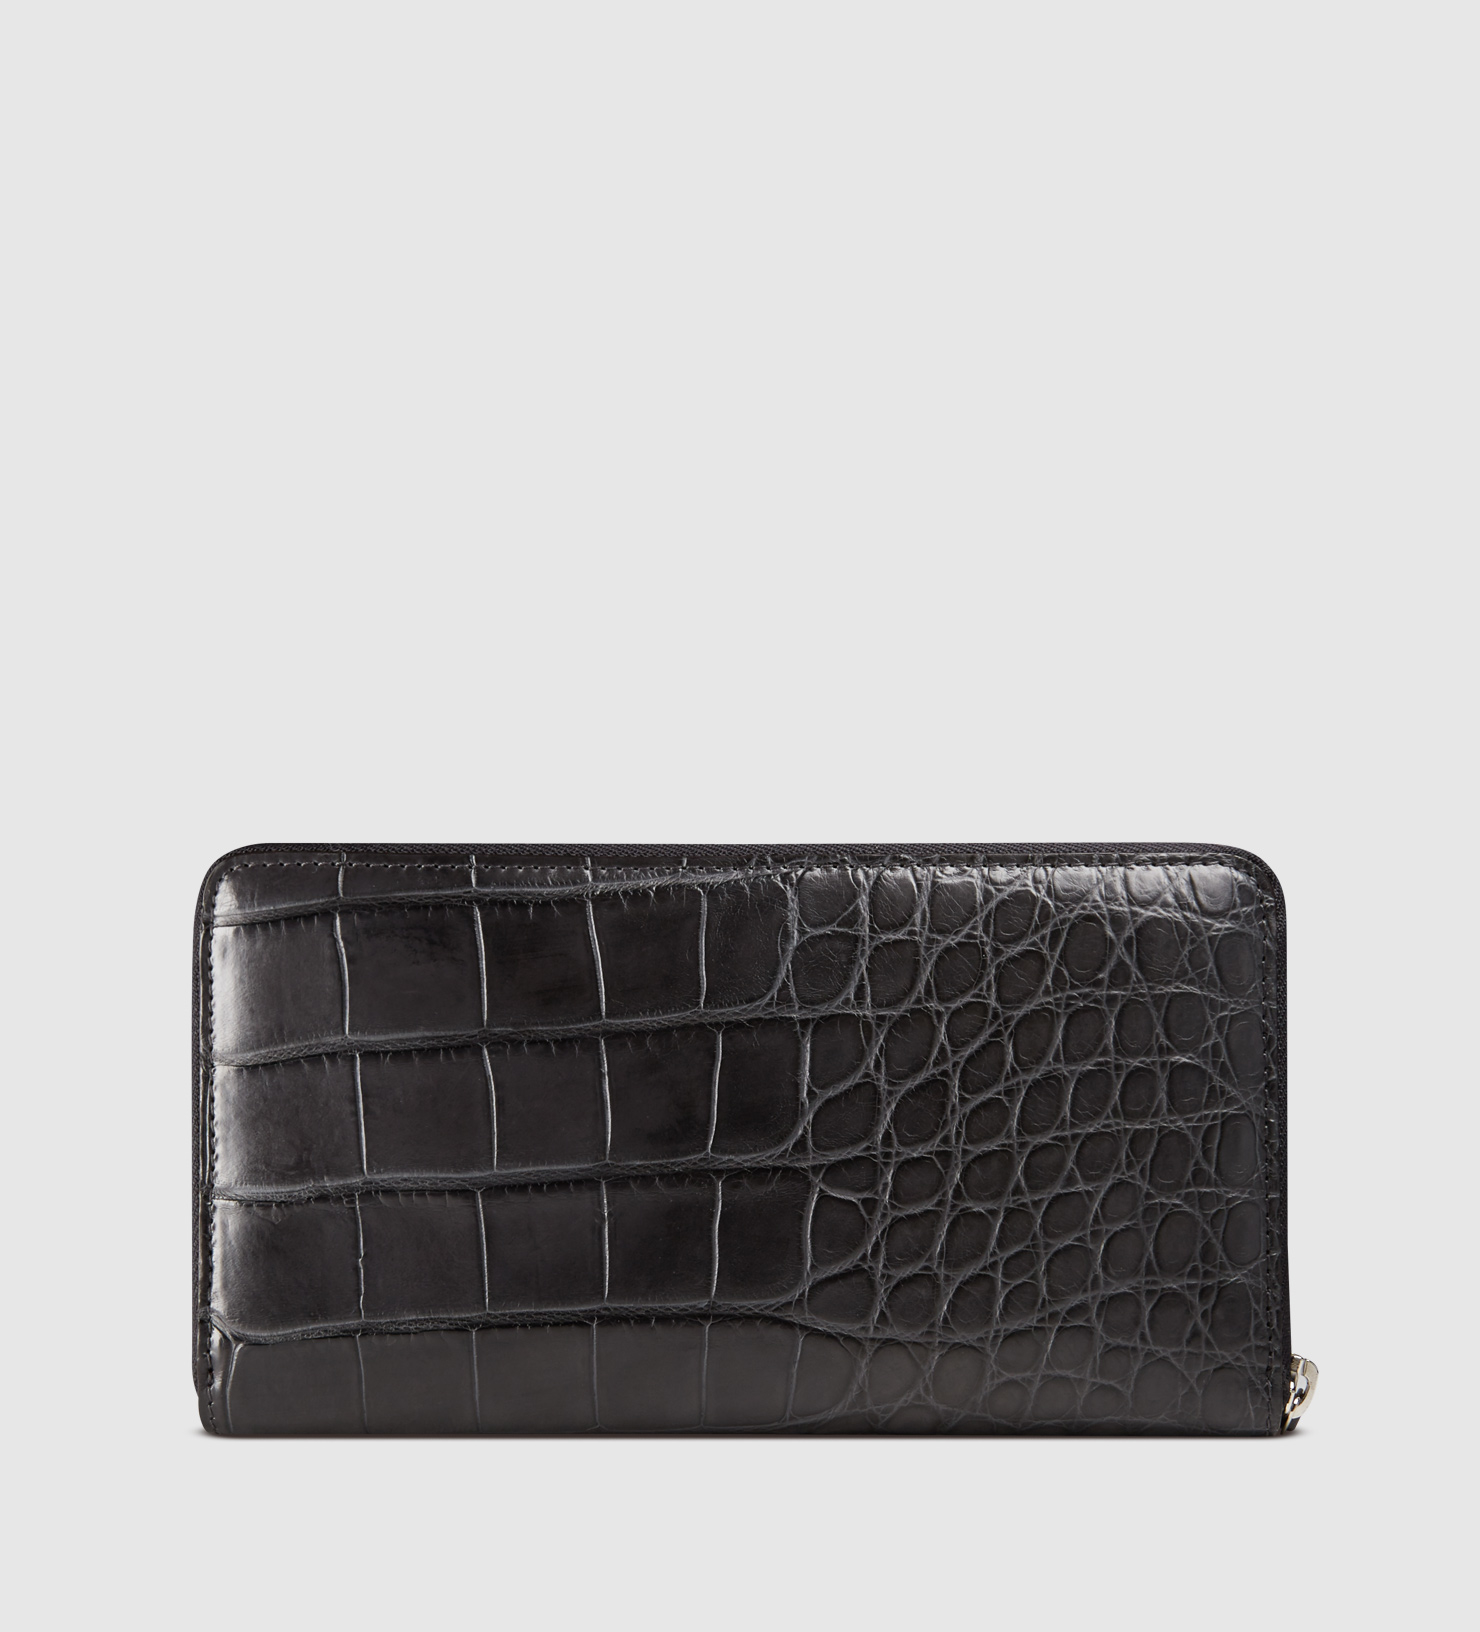 Gucci Crocodile Travel Document Wallet in Black for Men - Lyst